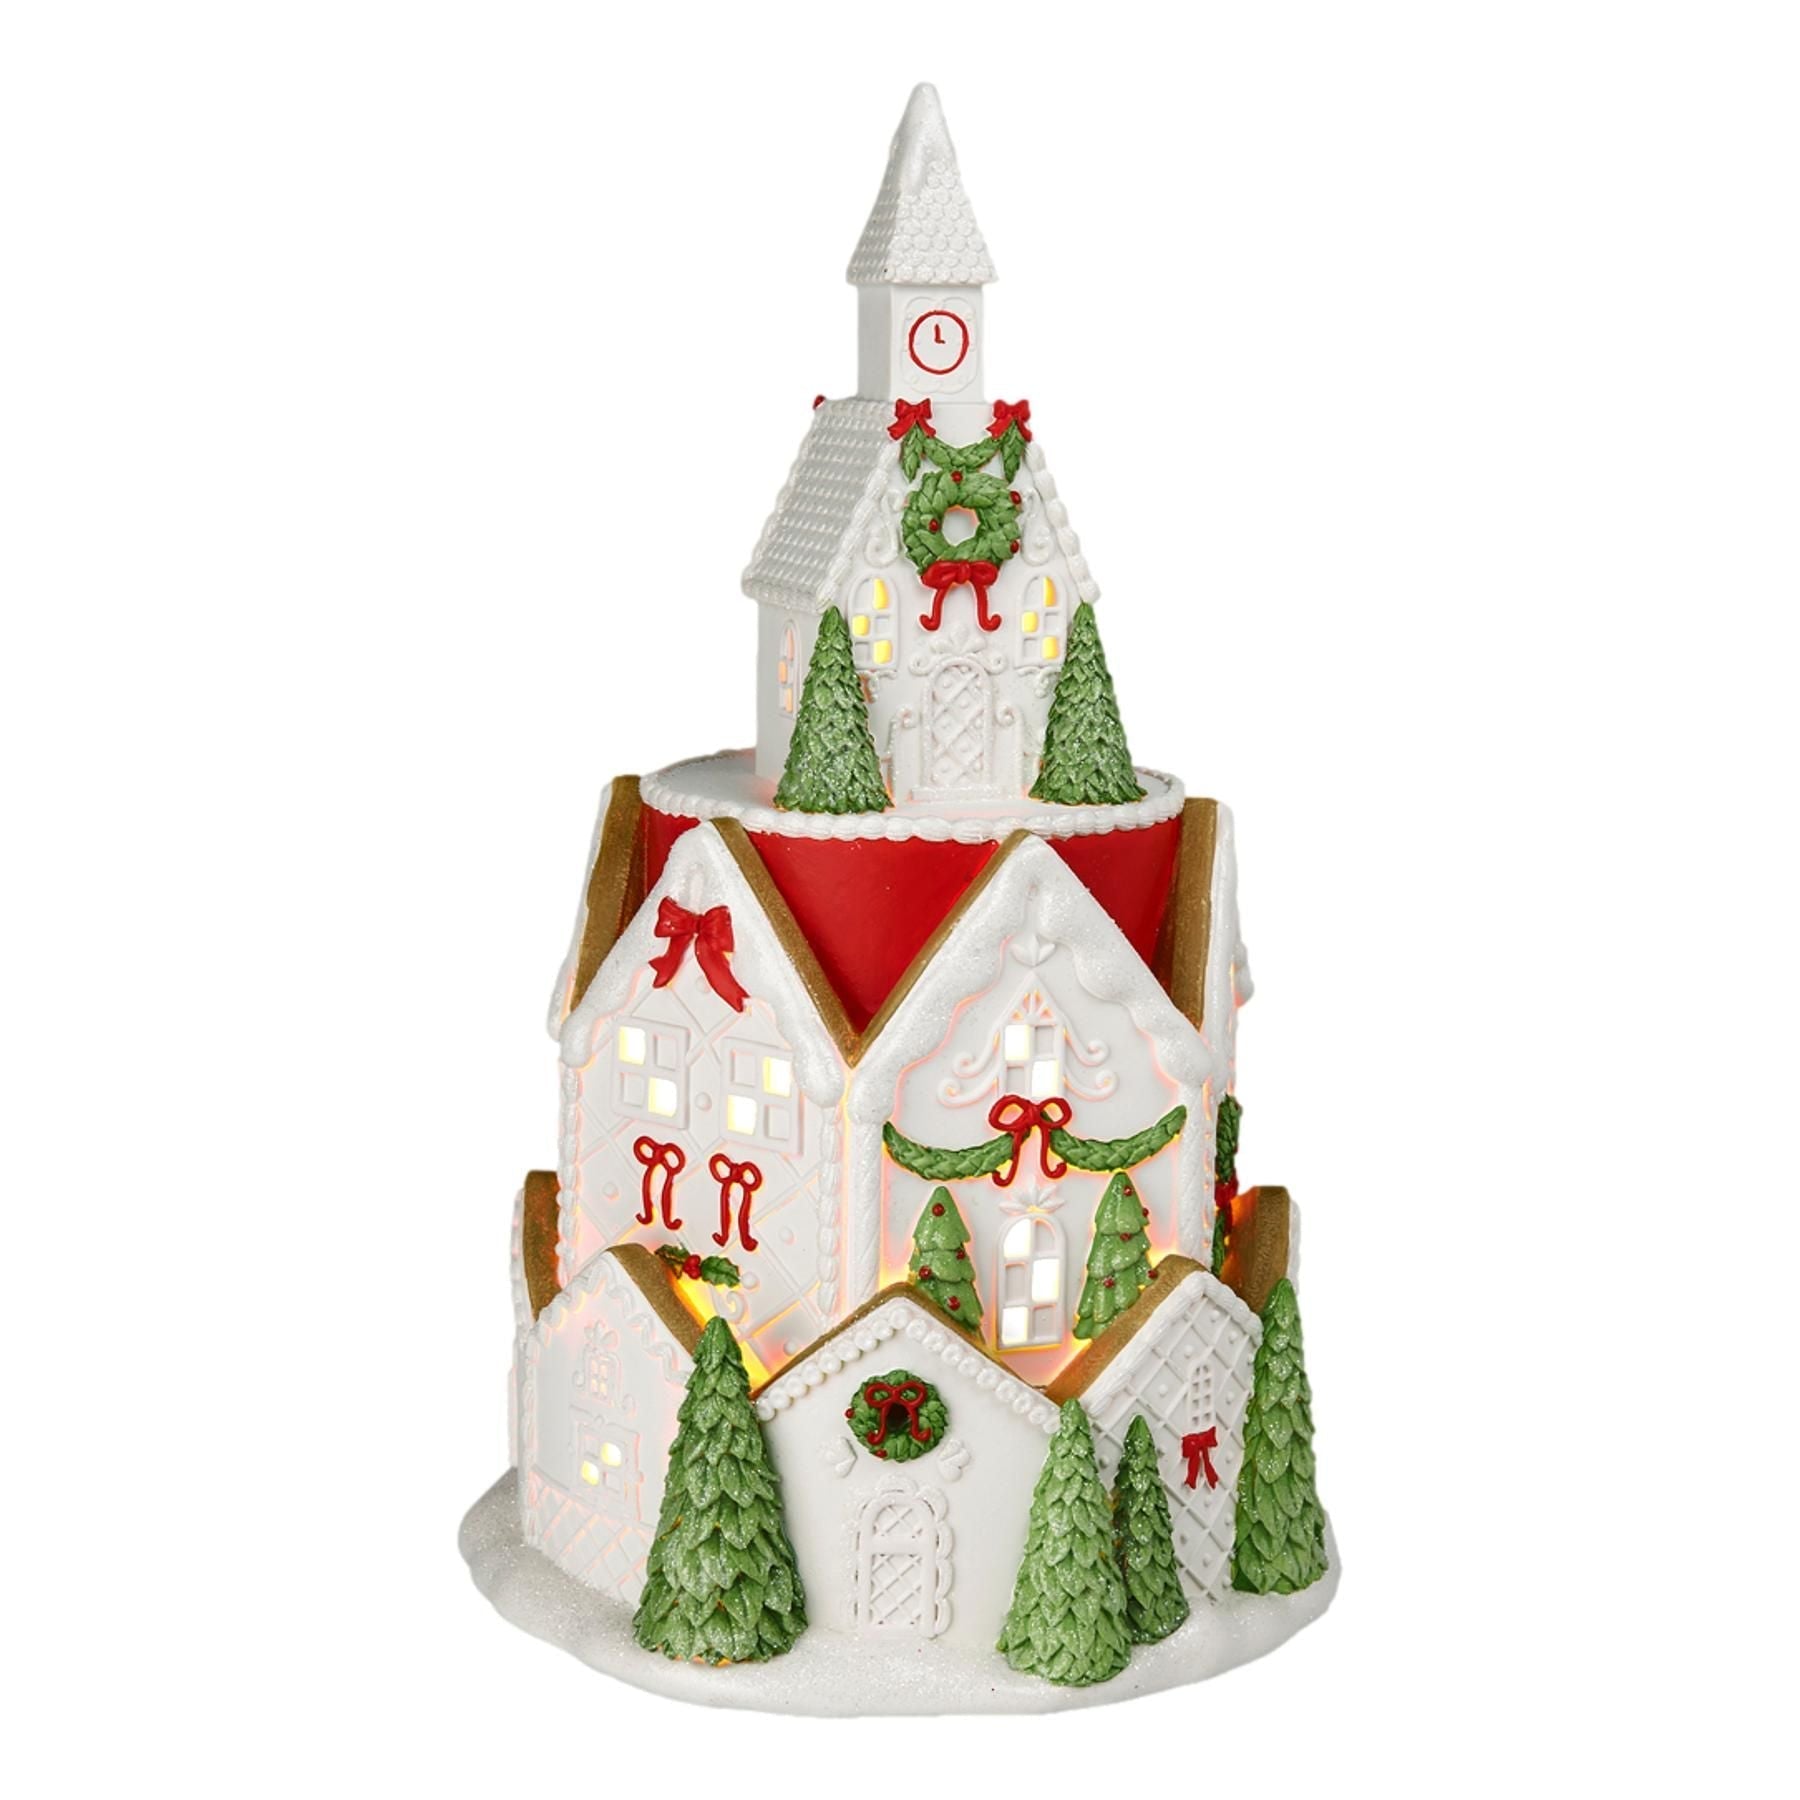 Round Red Roof Village - 52cm - My Christmas